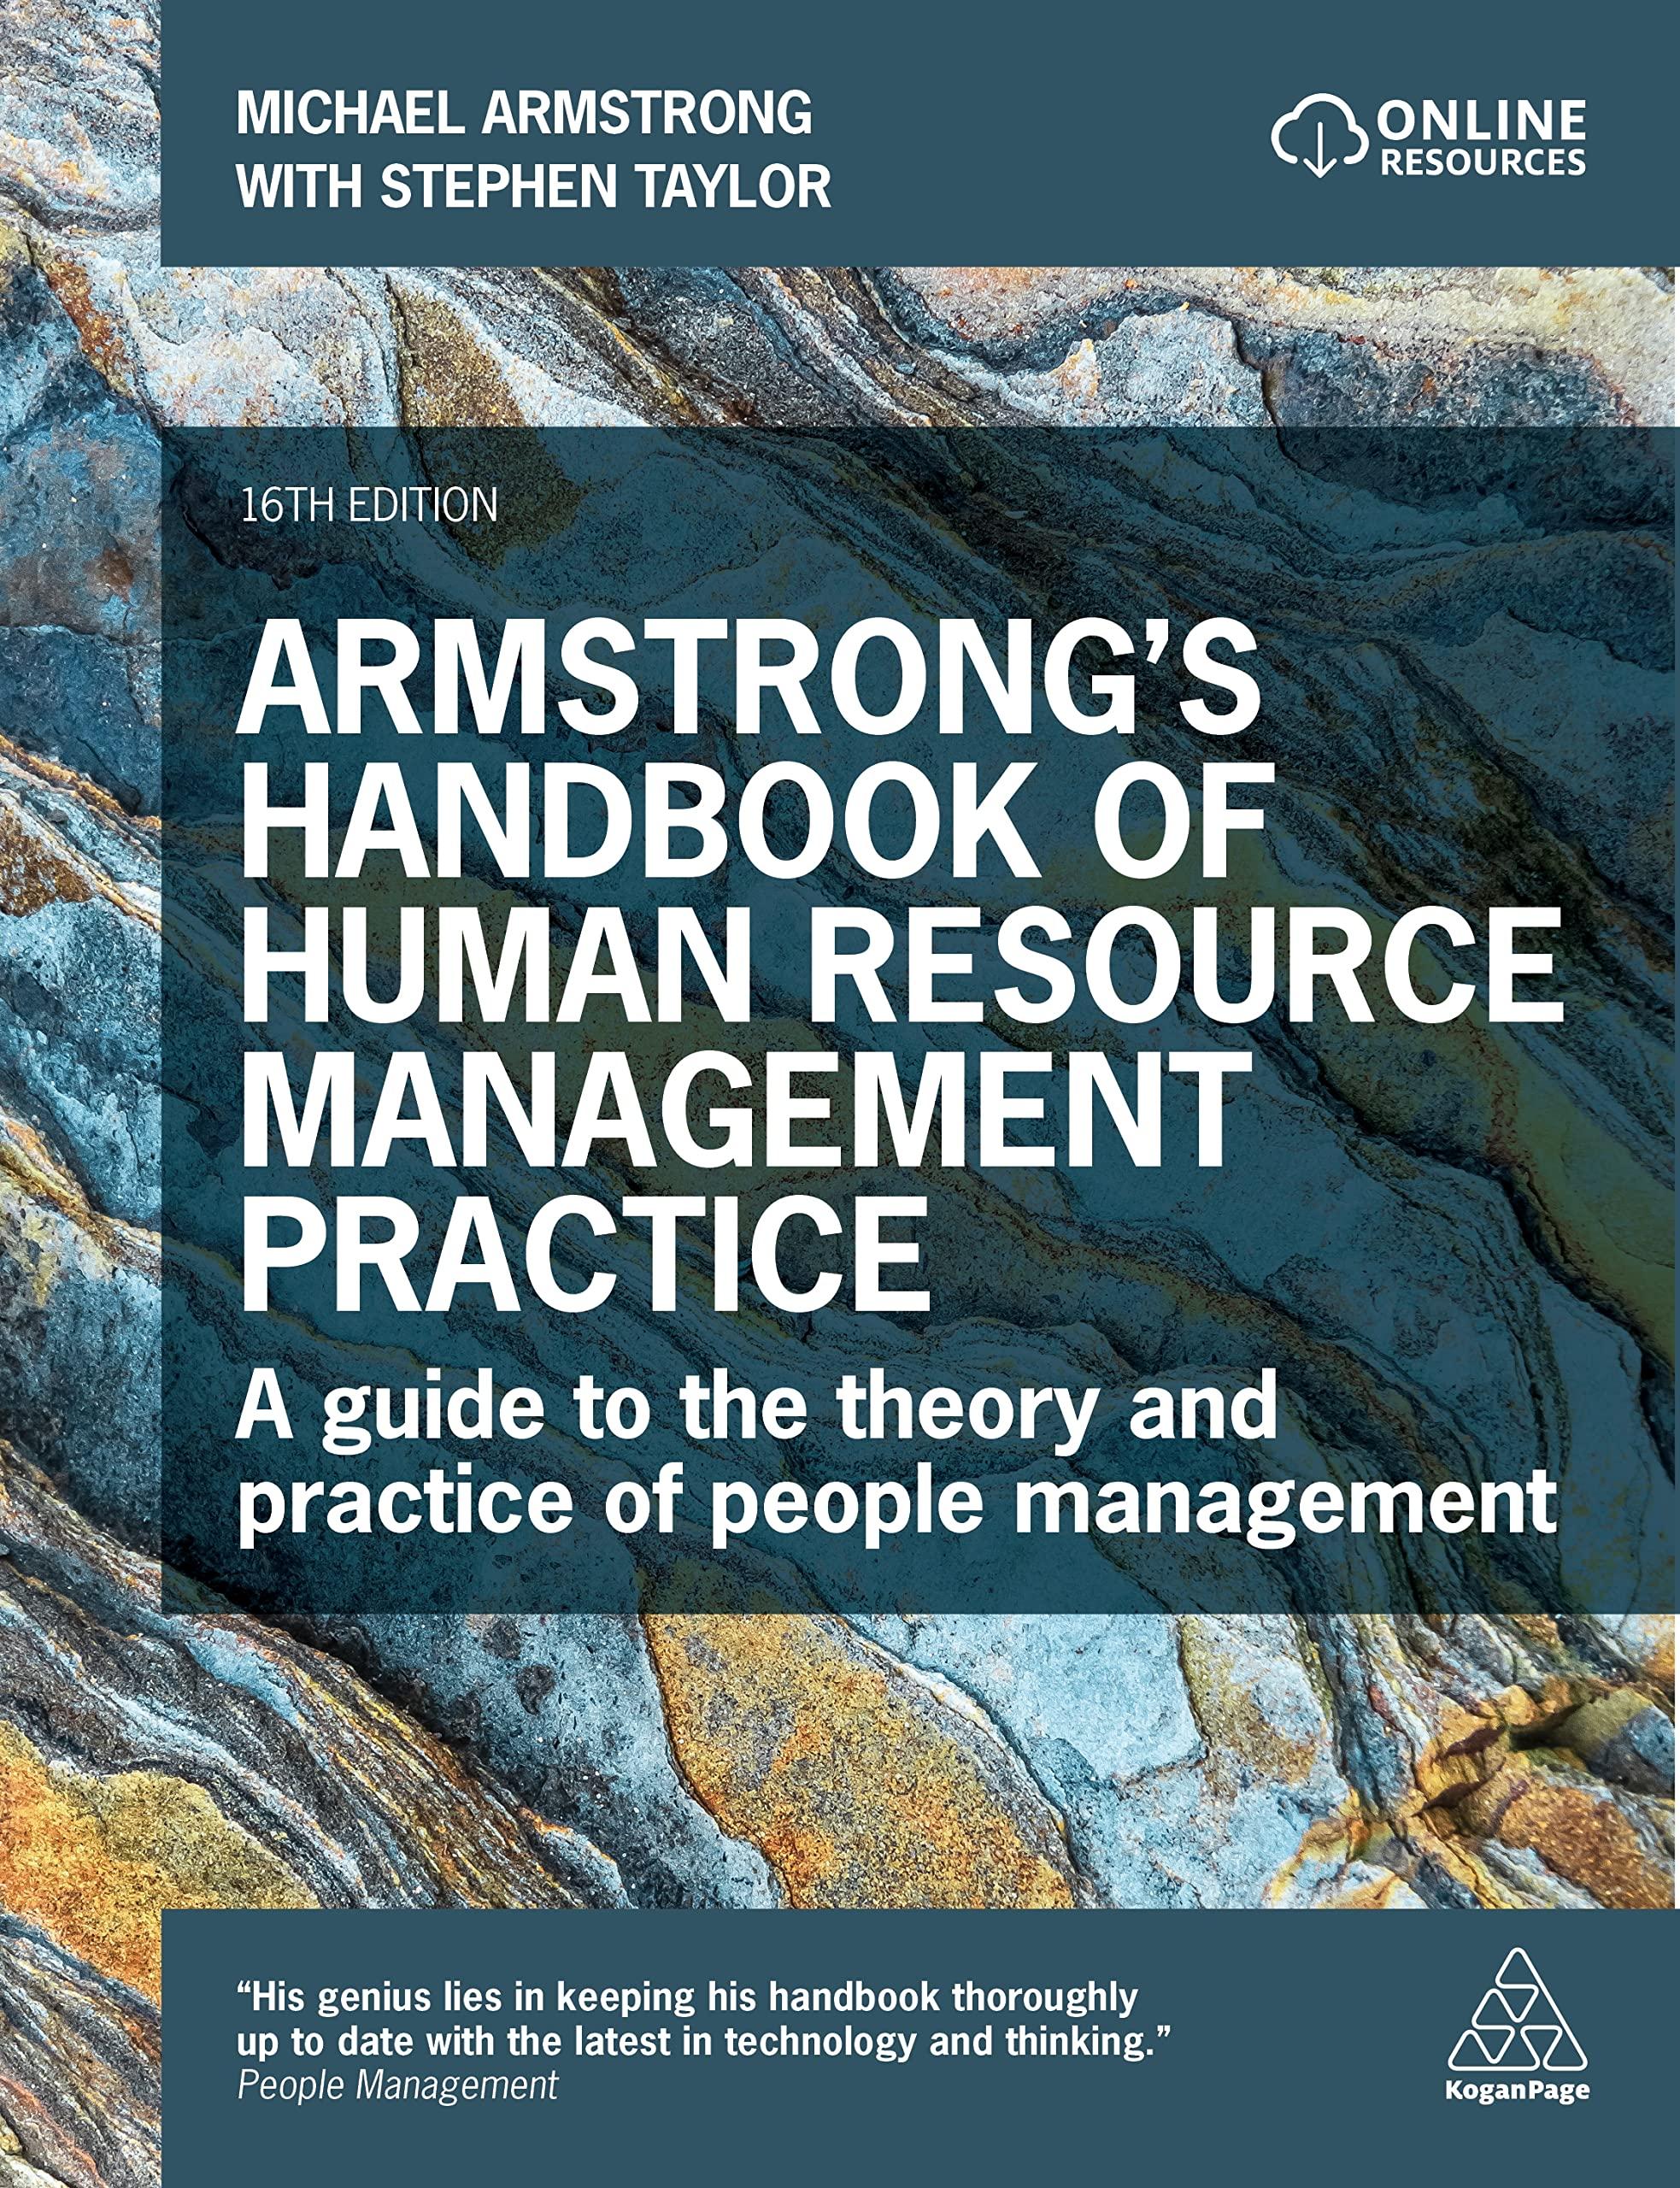 armstrongs handbook of human resource management practice a guide to the theory and practice of people